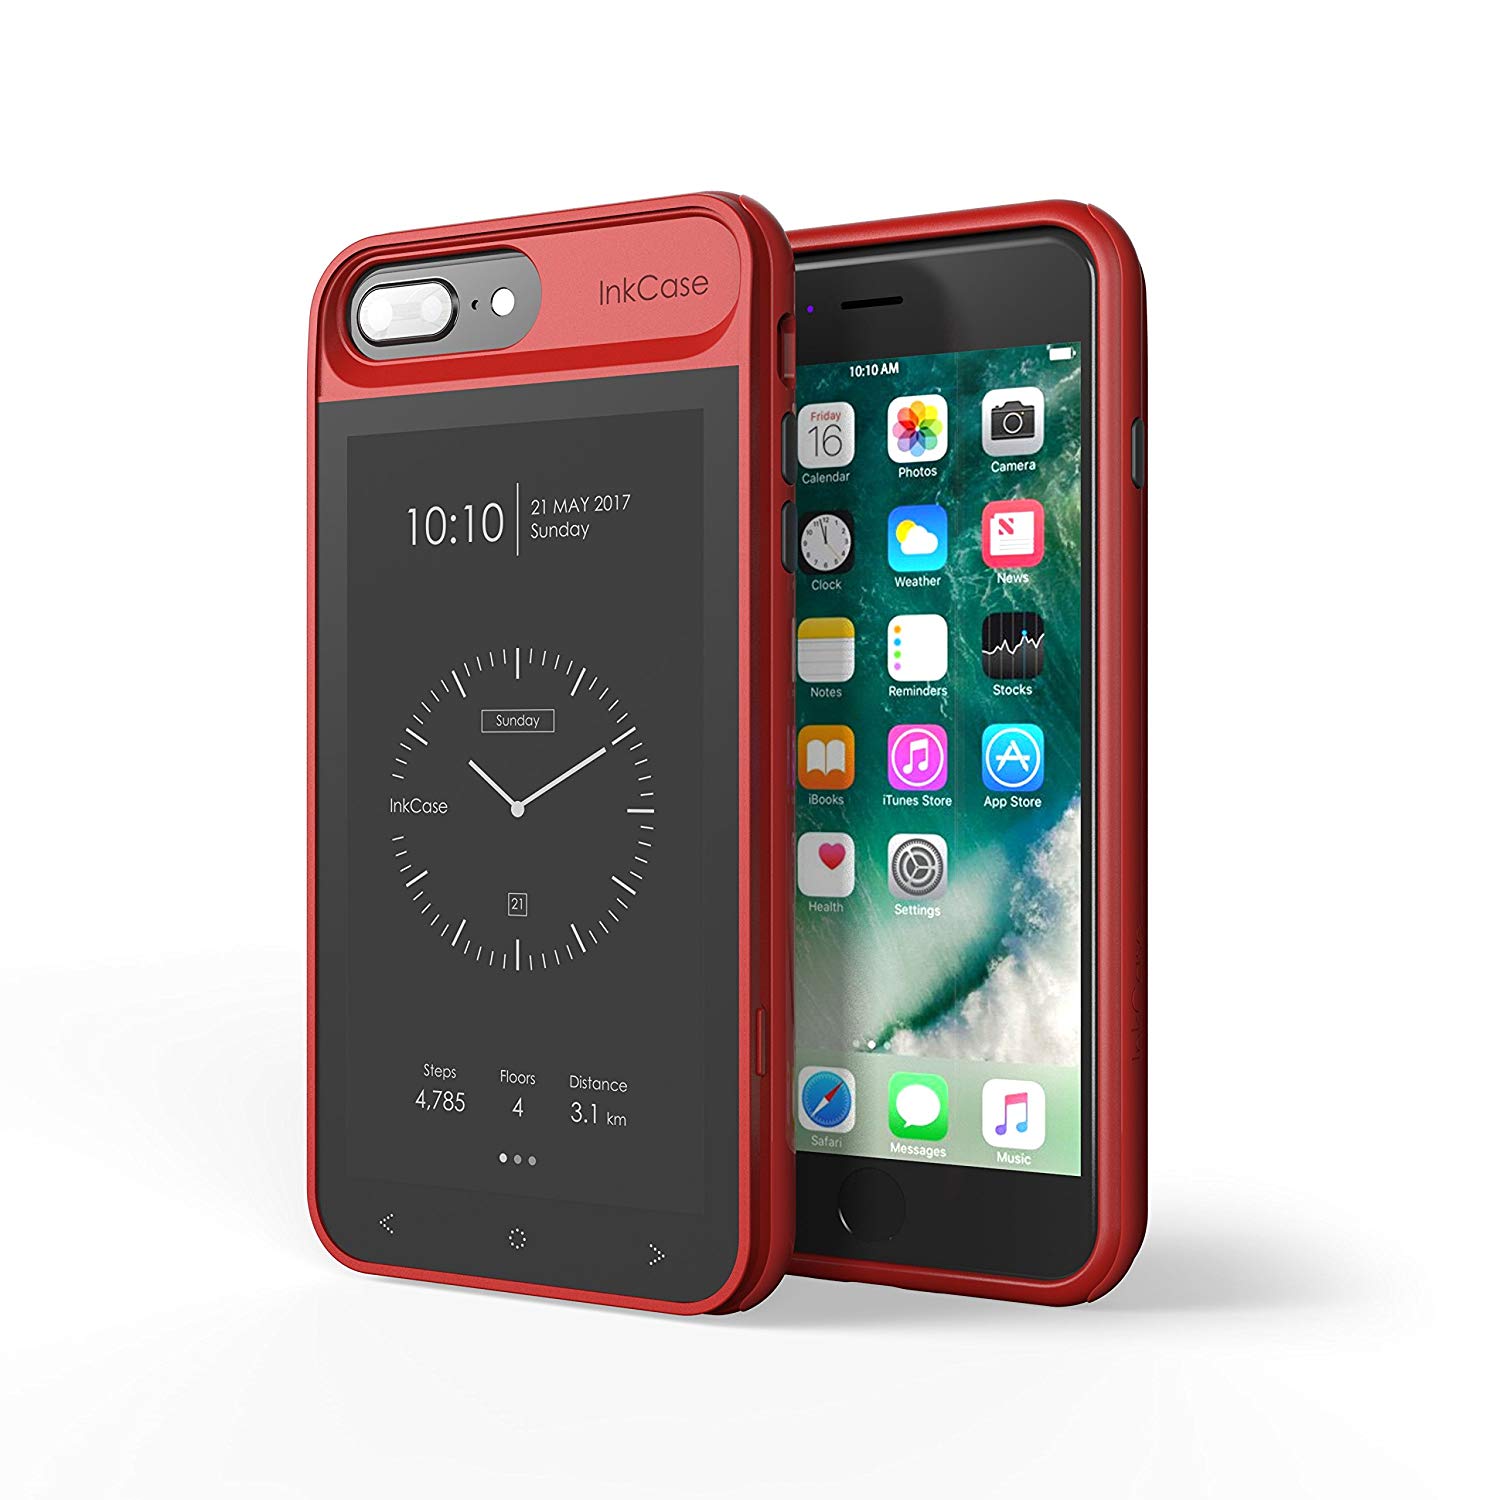 Oaxis Cell Phone Case for iPhone 6/6s/7/8 Plus - Red Pattern 2